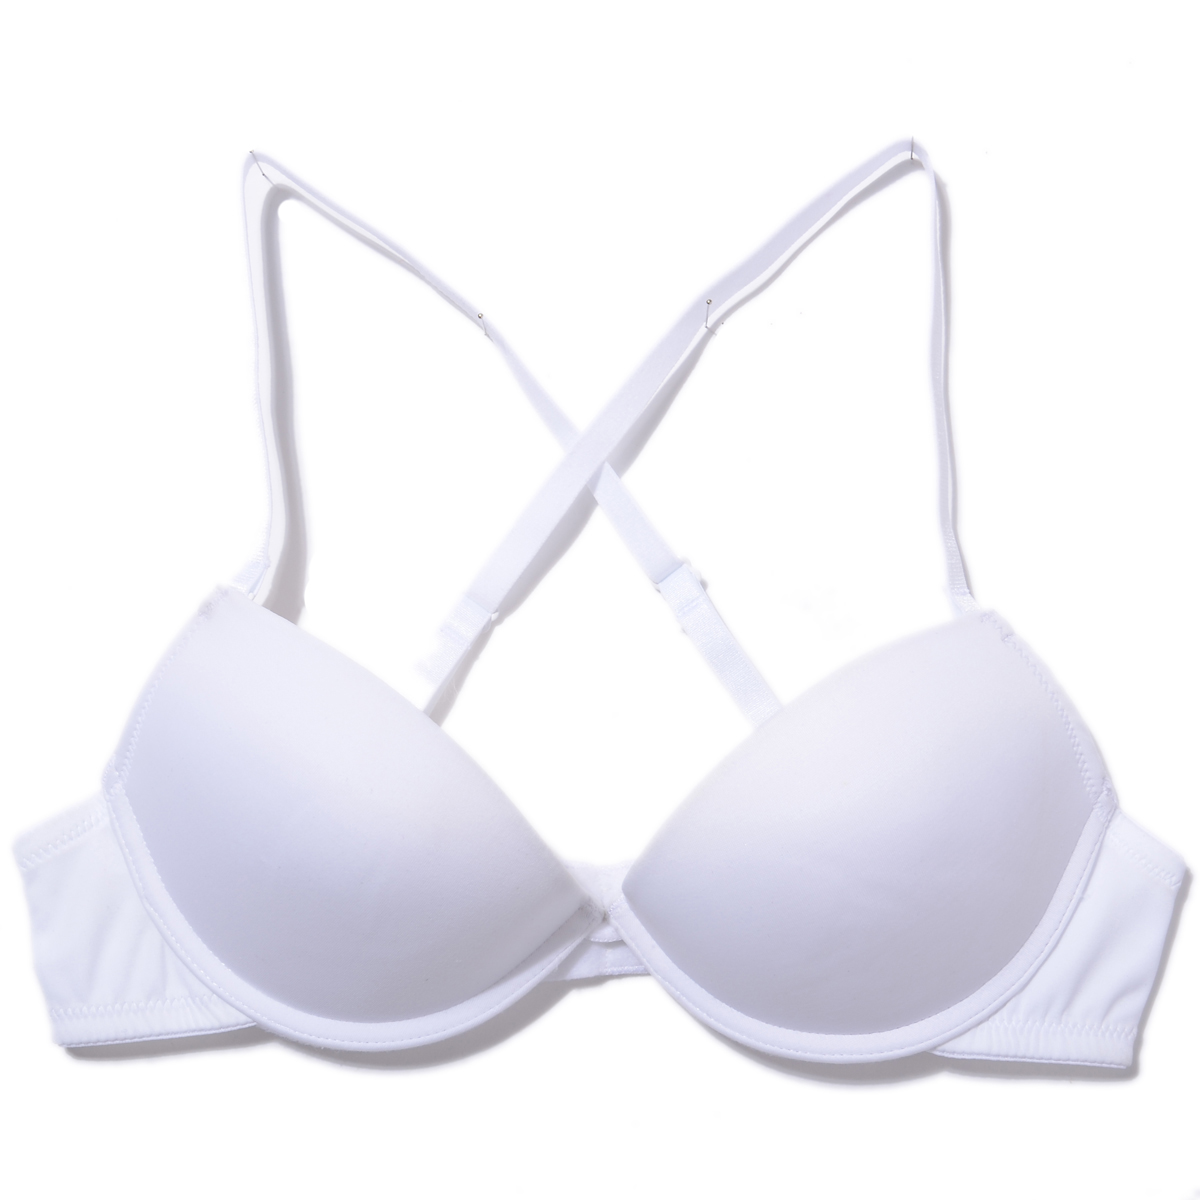 Yamamay single-bra plunge white glossy thick thin bra invisible shoulder strap underwear